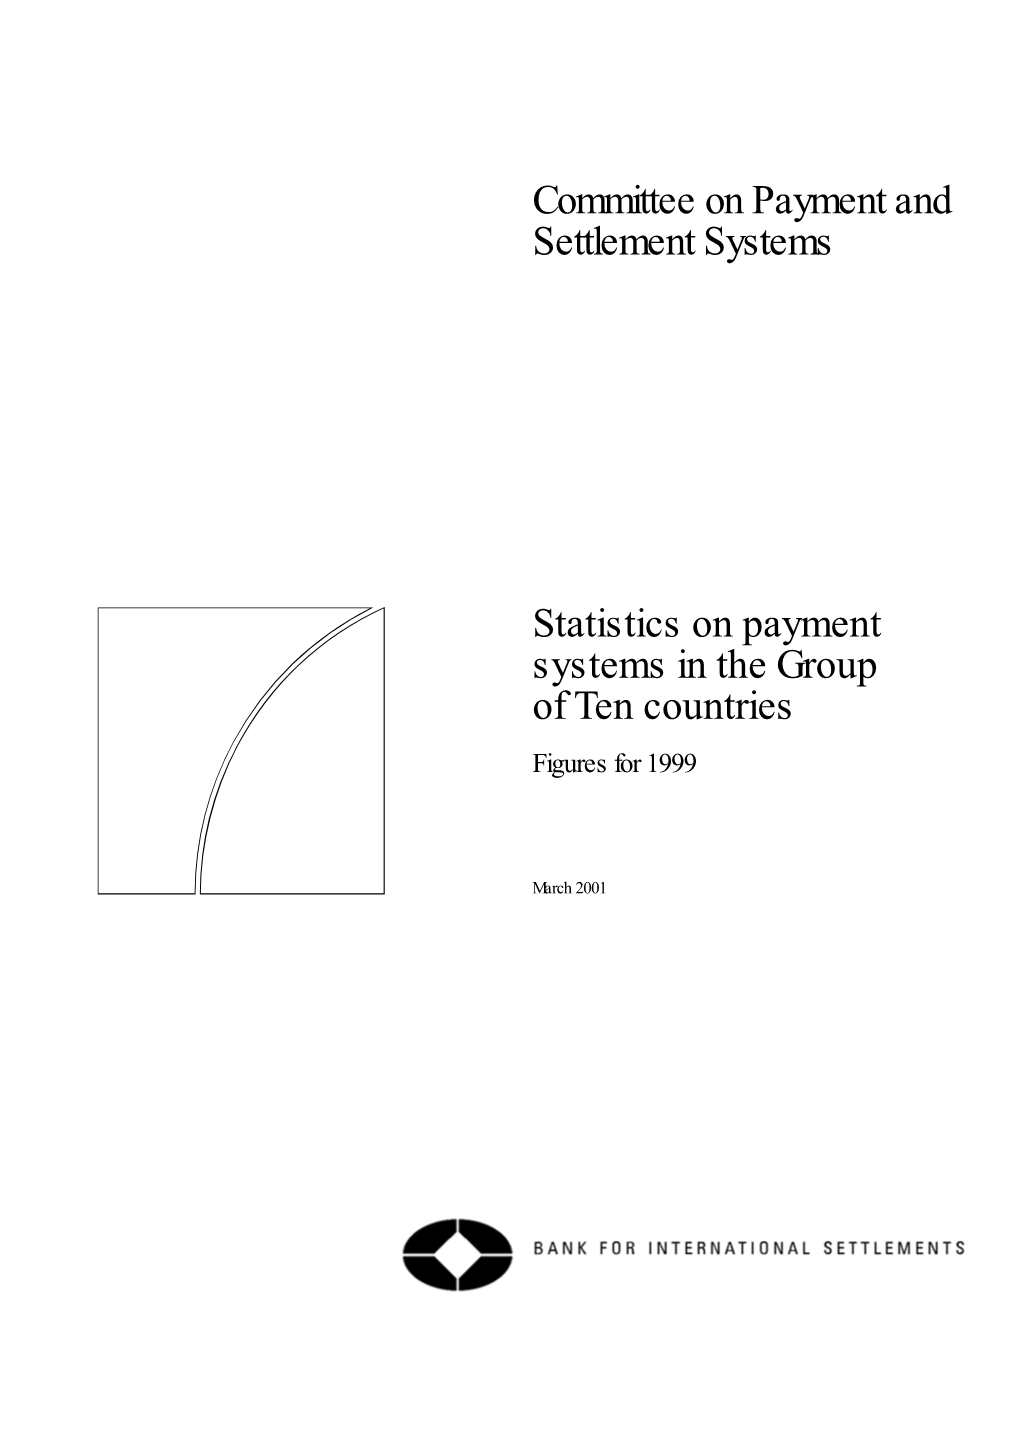 Statistics on Payment Systems in the Group of Ten Countries Figures for 1999